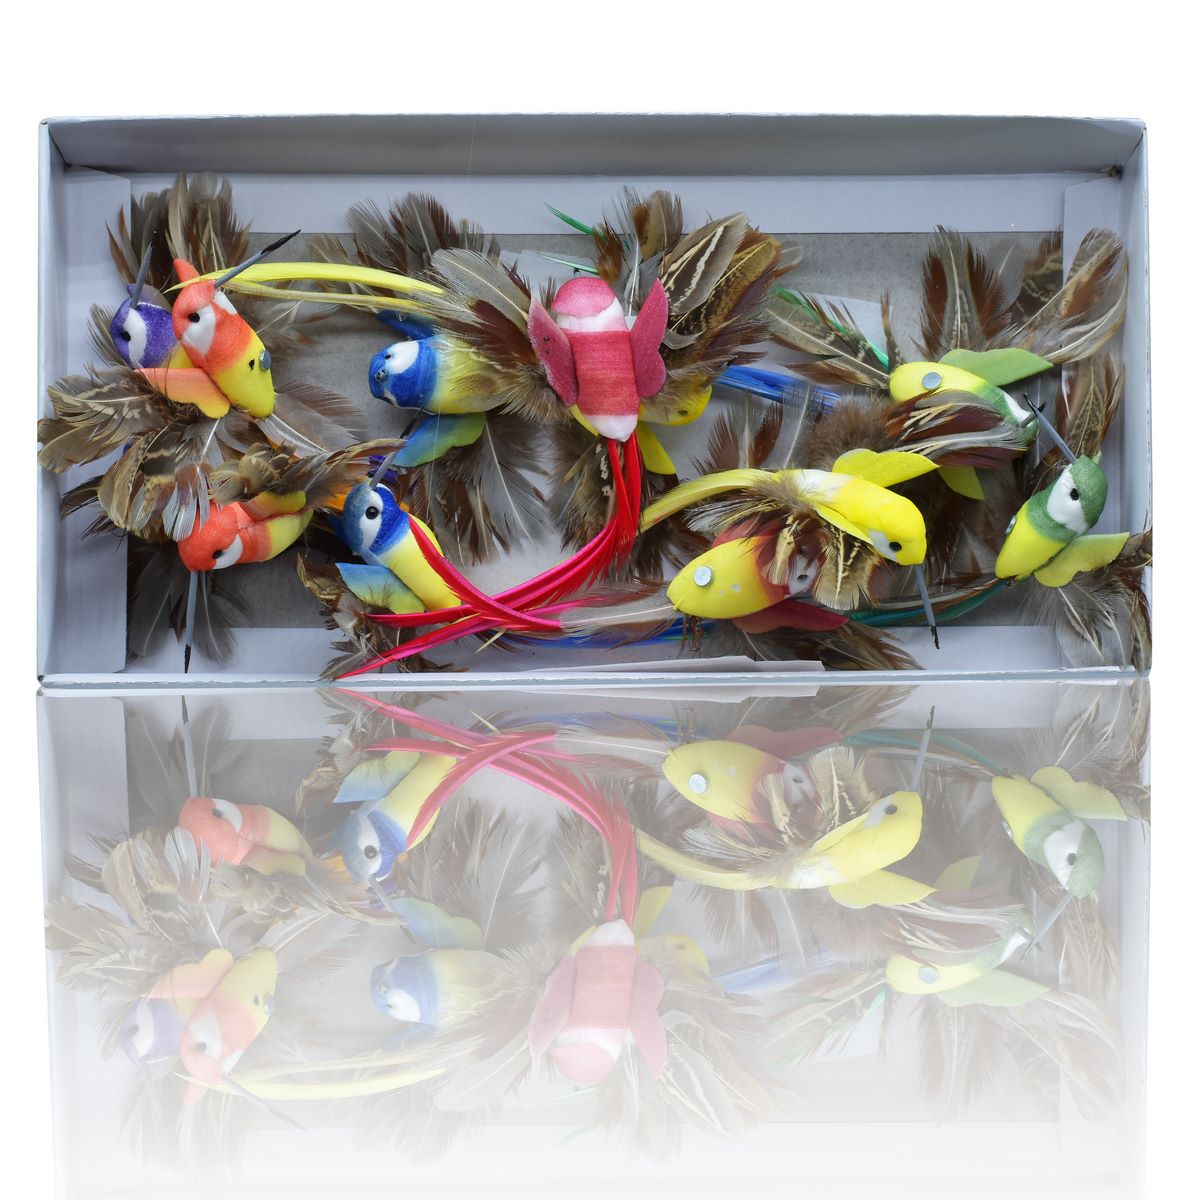 jags-mumbai Artificial Bird & Cage Artificial Birds With Magnet I Contain 1 Unit Bird I 5-6 Cm approx I used for art and craft